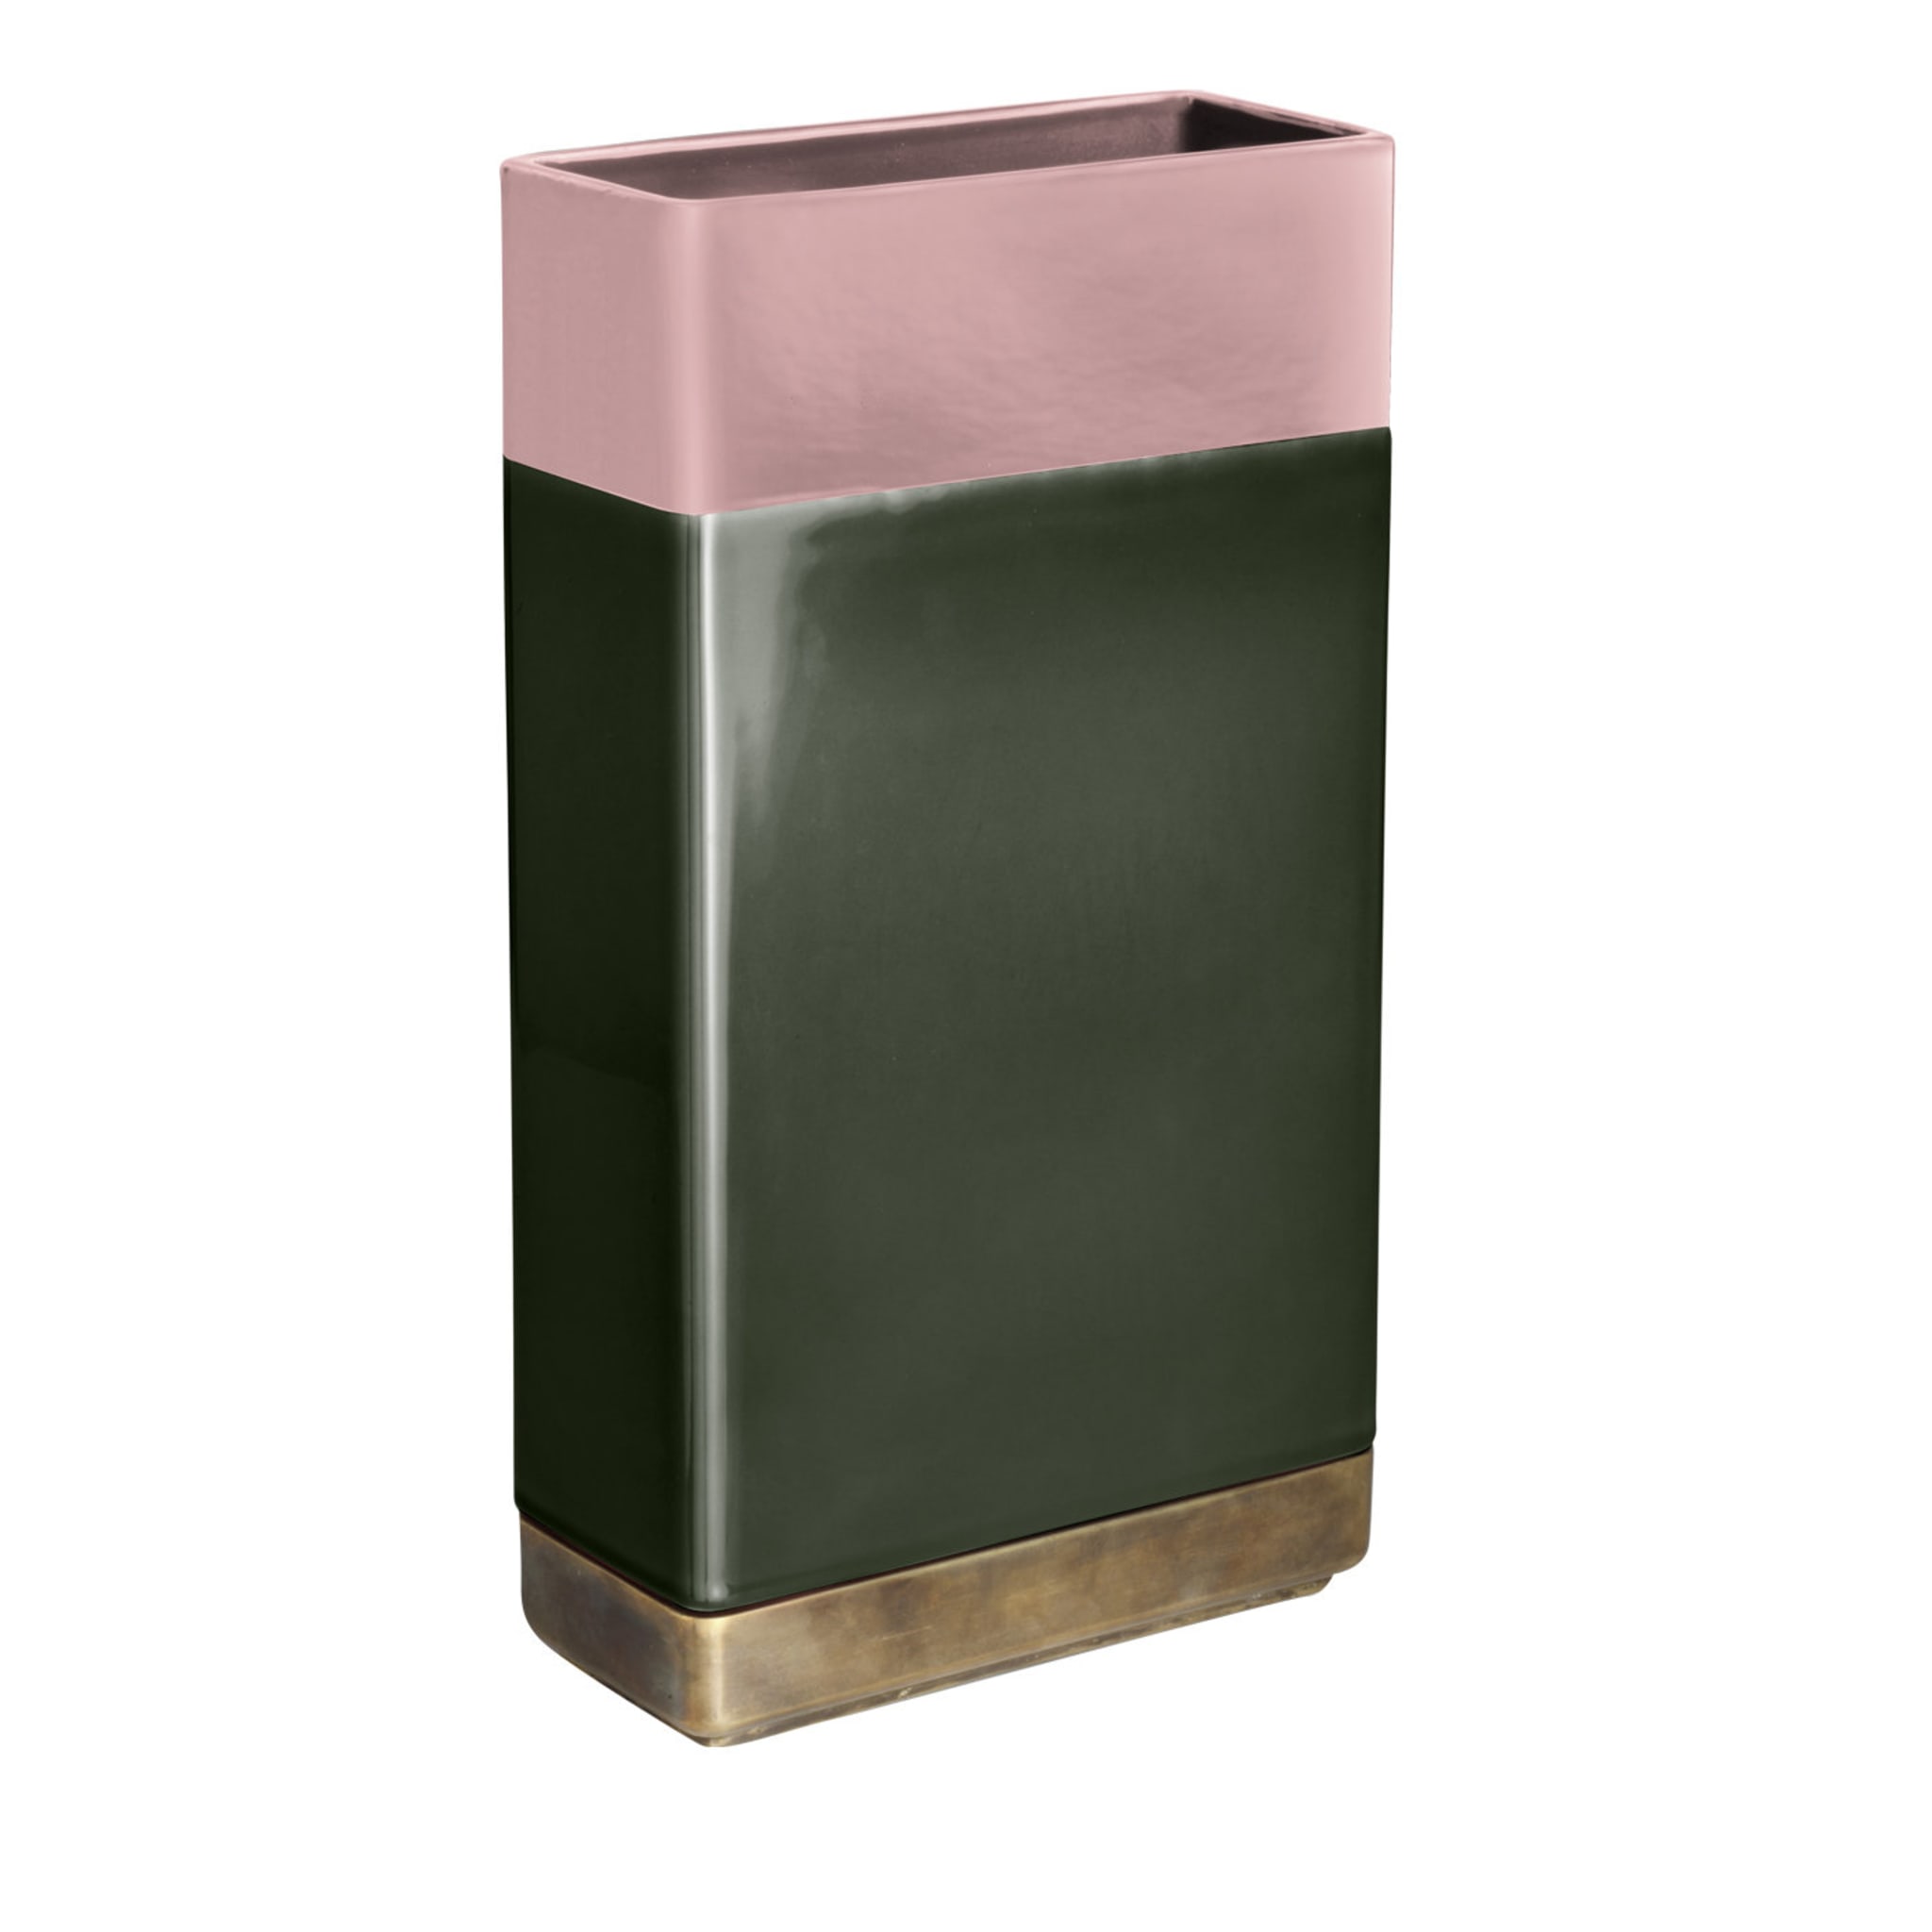 Tall Pink and Green Vase by Dimorestudio - Main view